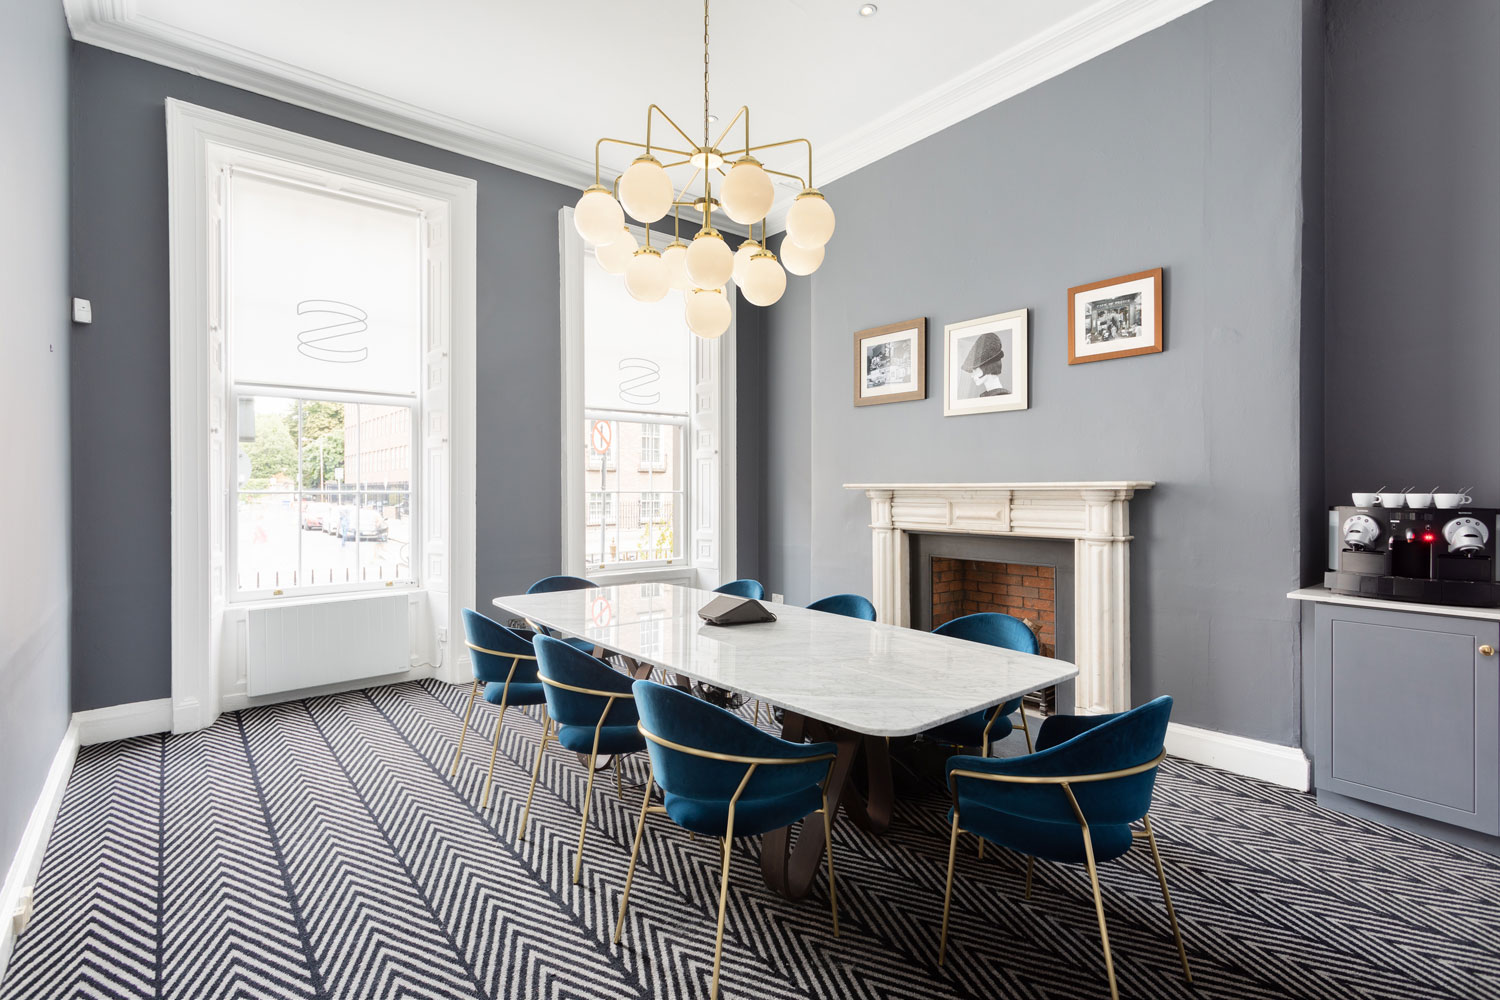 Statement chandeliers in the modern interior of this co-working space in Dublin